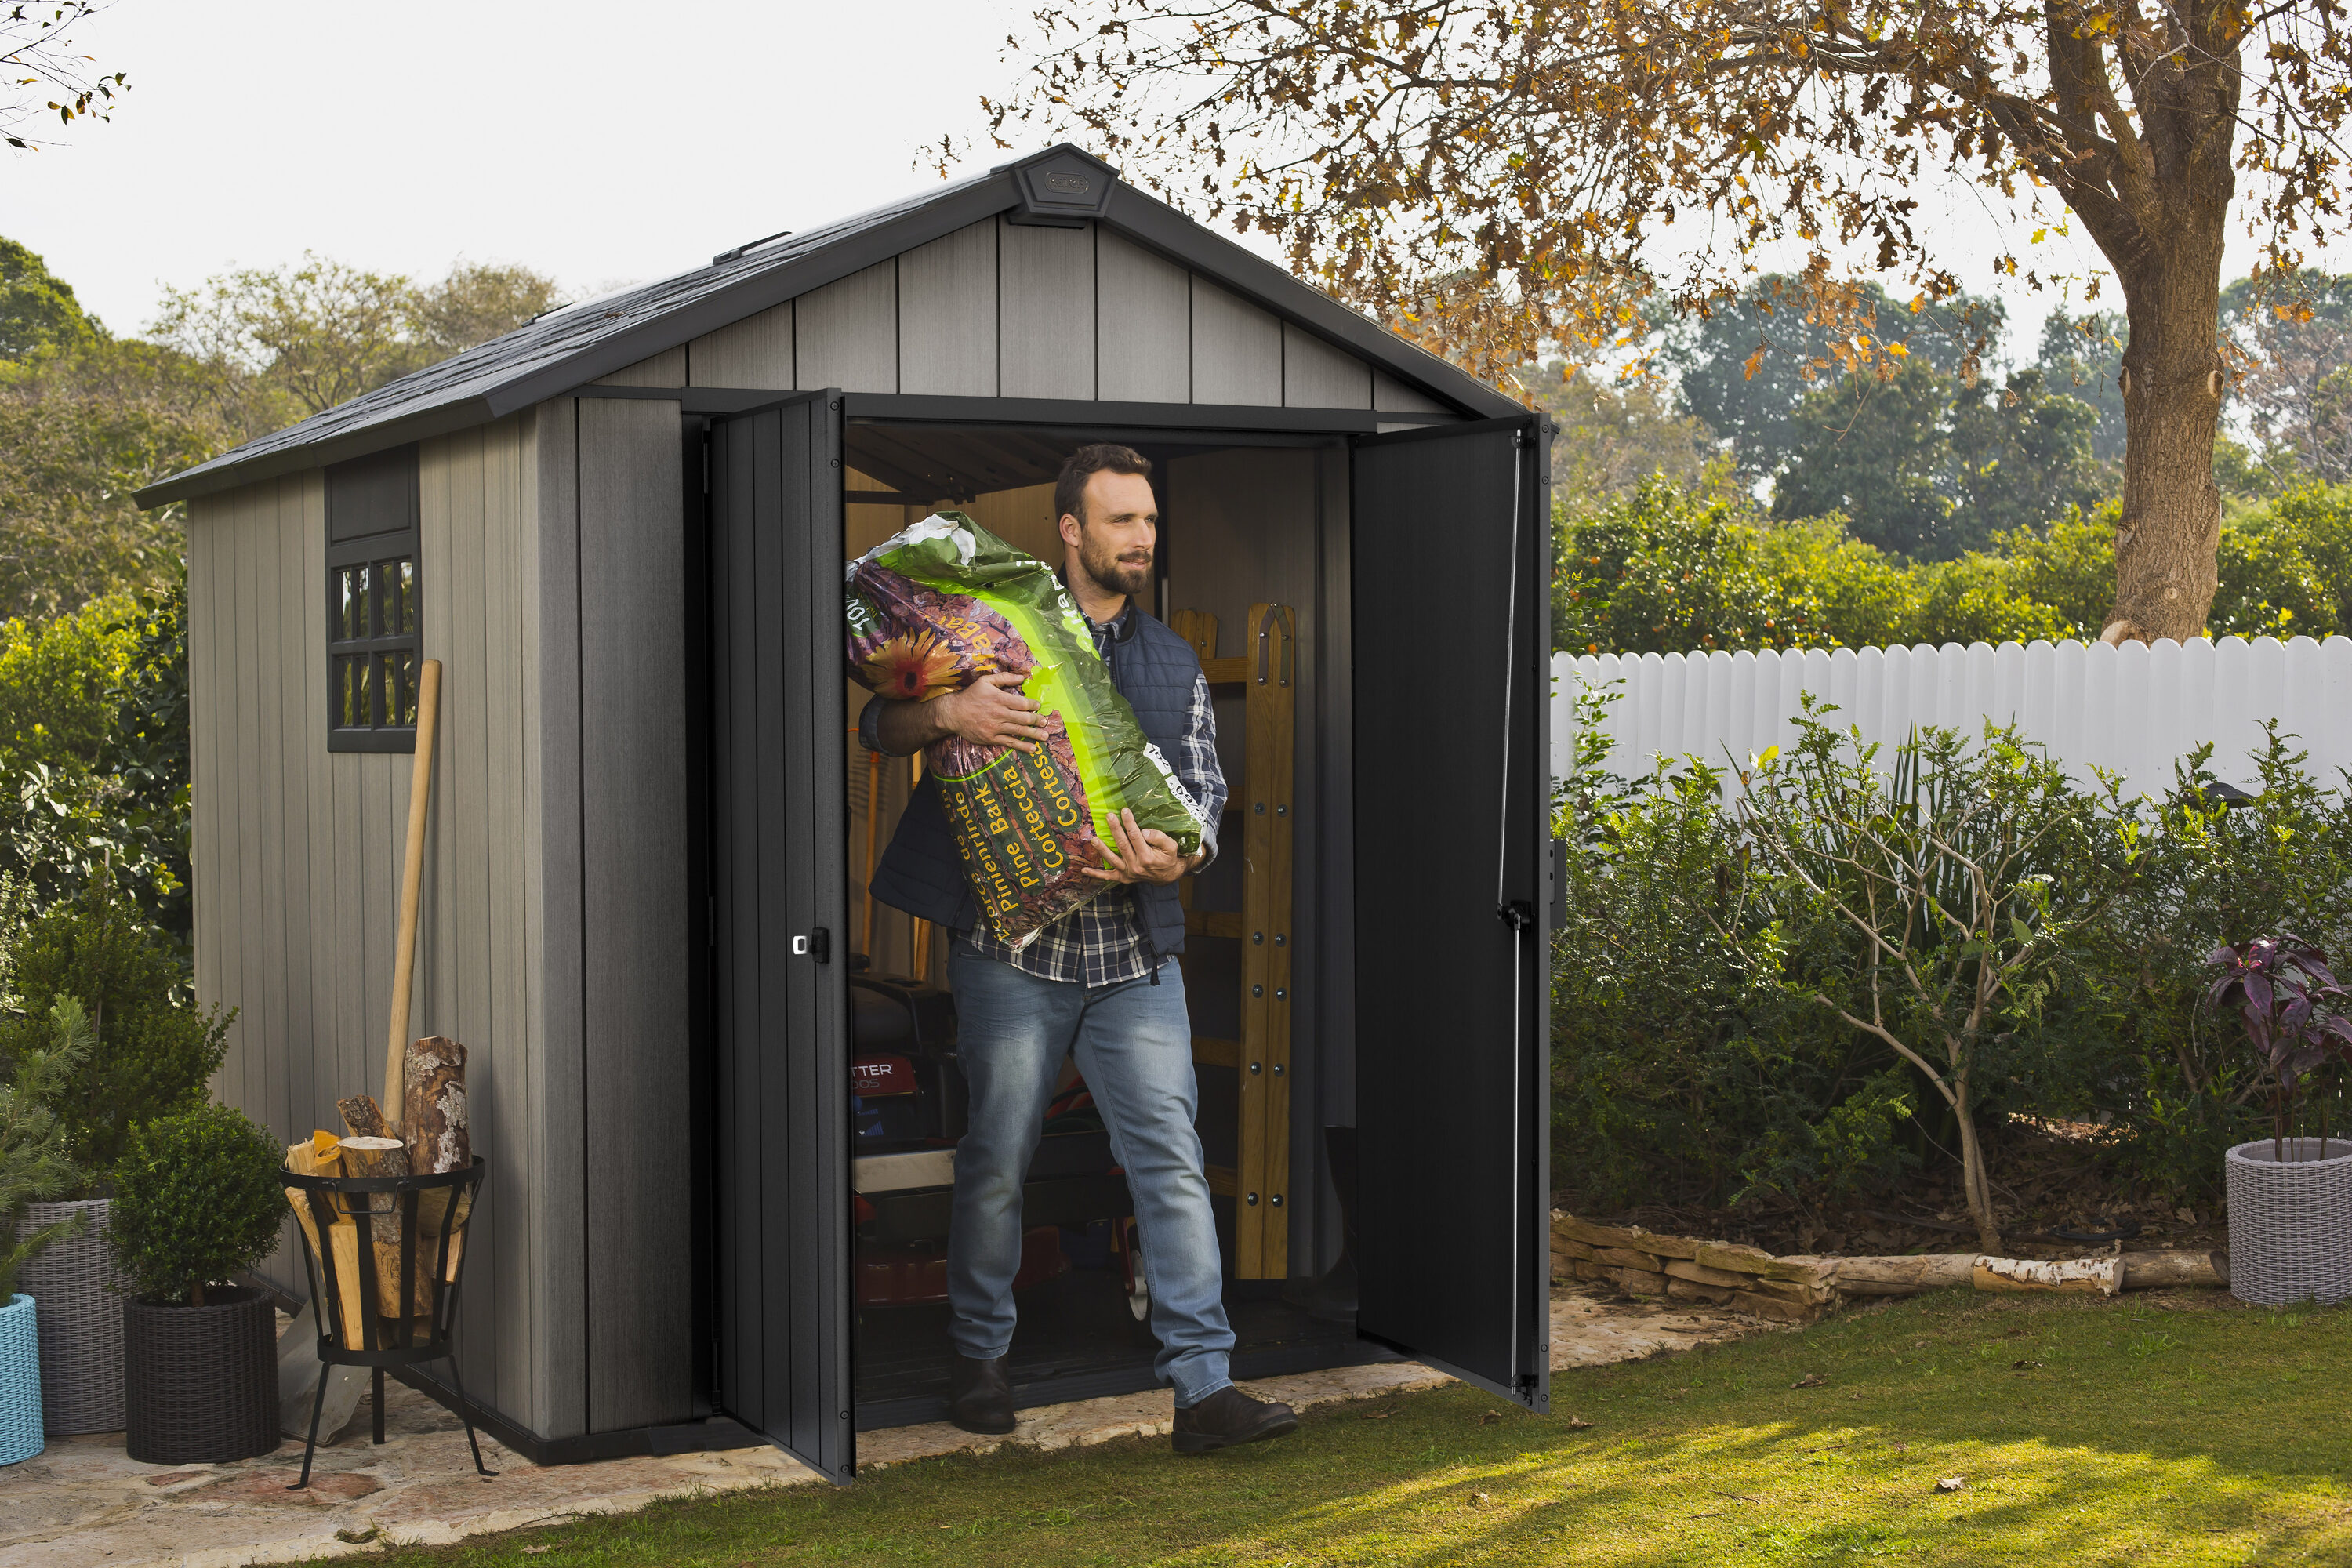 Reviews for Keter Factor 8 ft. W x 6 ft. D Large Outdoor Durable